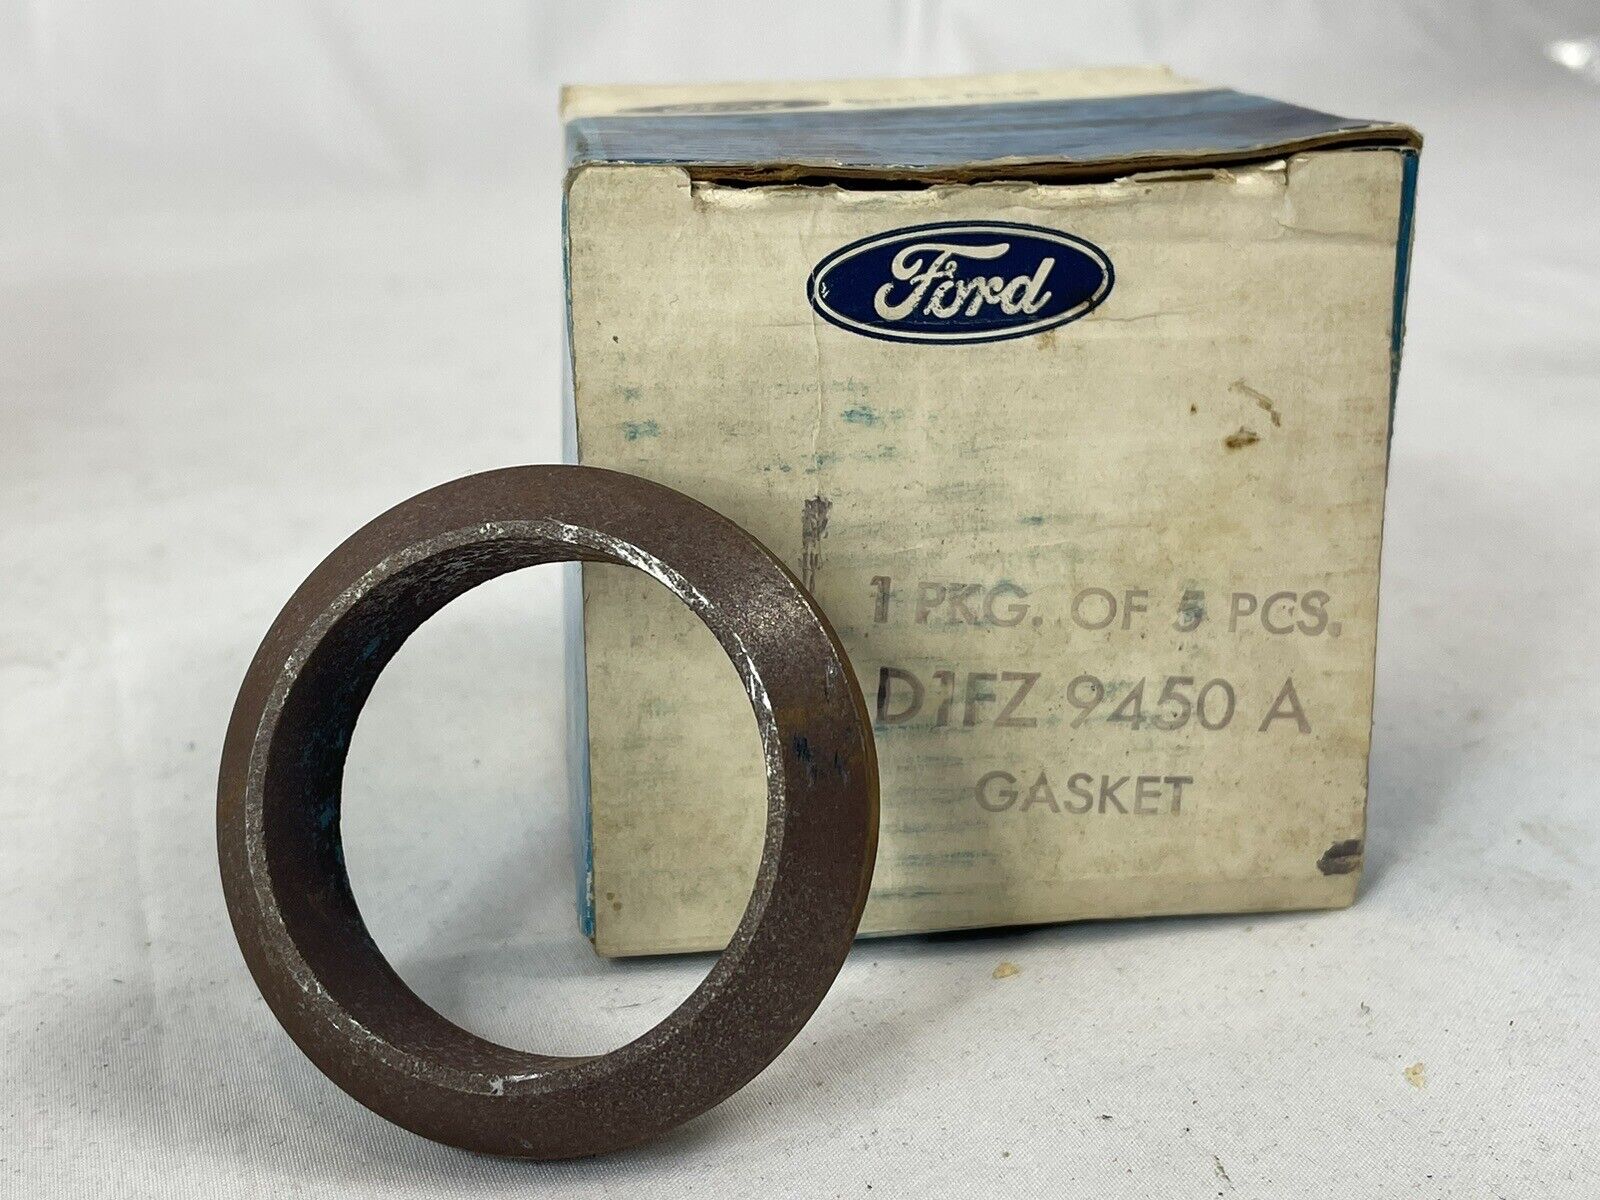 FORD 71-74 PINTO EXHAUST MANIFOLD INLET GASKET OEM D1FZ-9450-A NOS Part